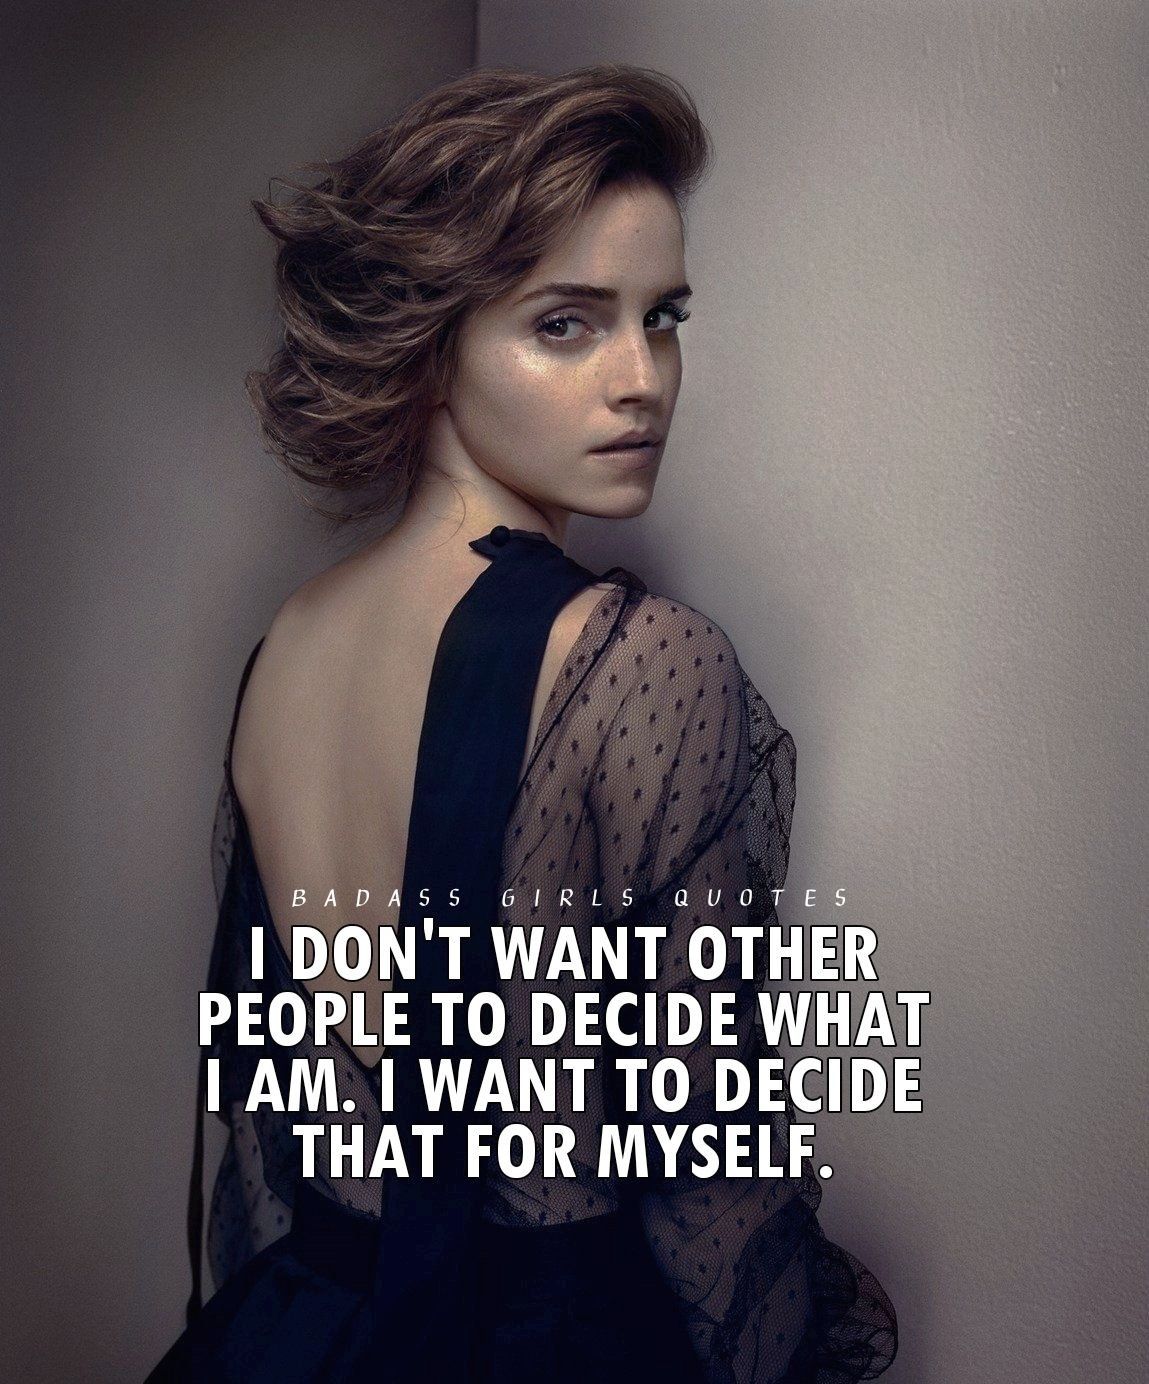 Most Inspiring Emma Watson Quotes, Motivational Quotes, Inspirational Quotes,. Emma watson quotes, Girl quotes, Quotes that describe me